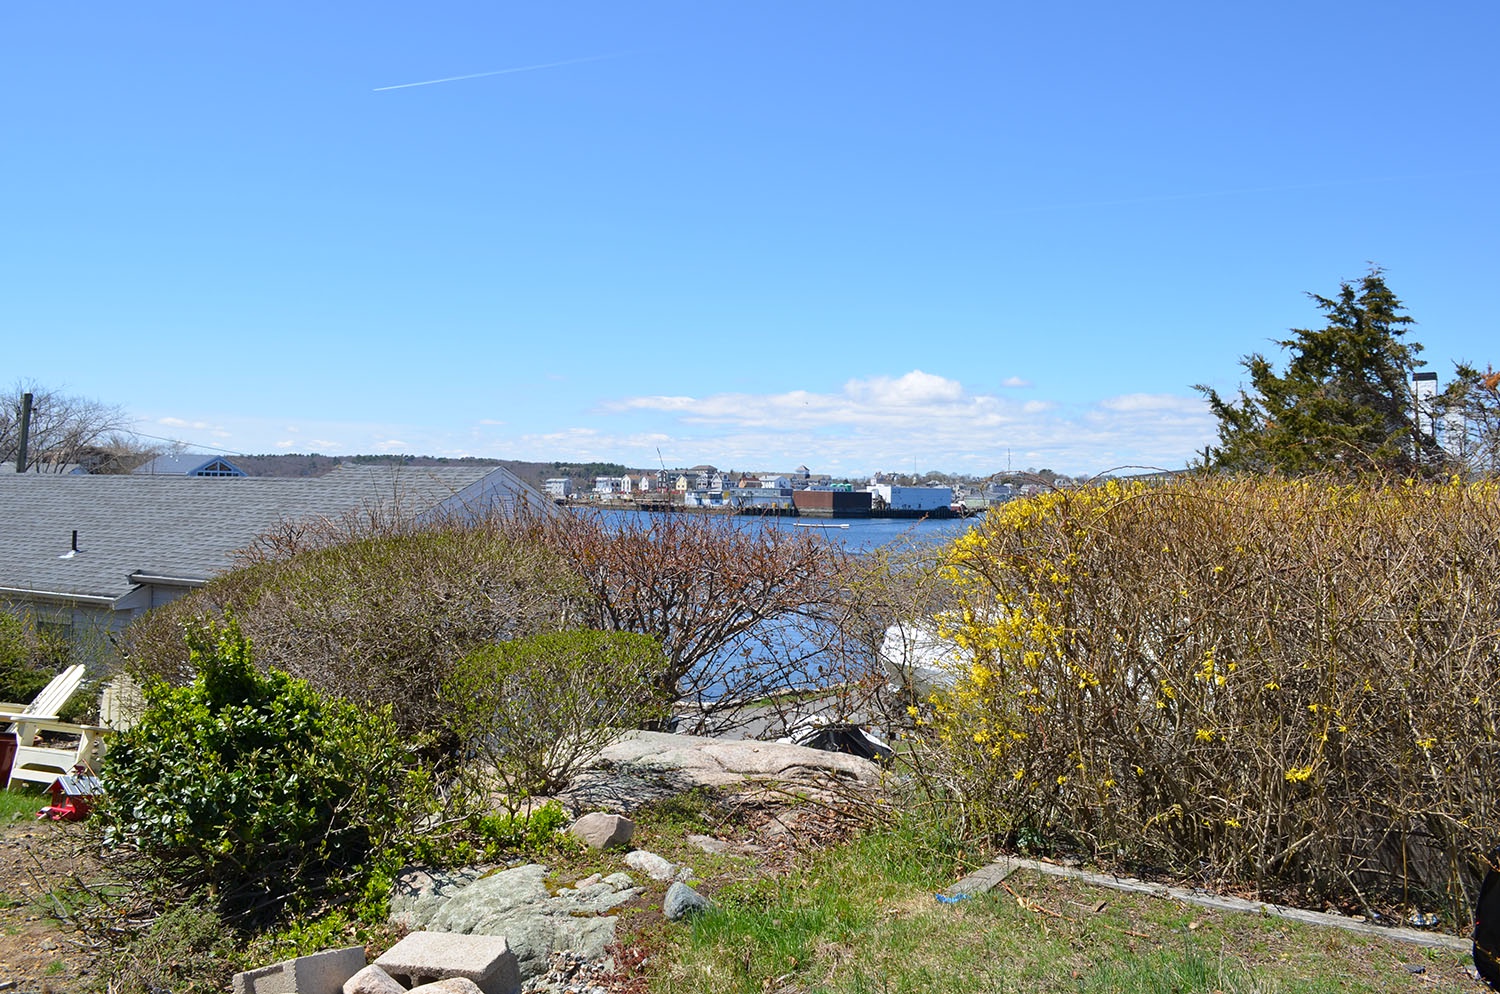 View of Gloucester Harbor.